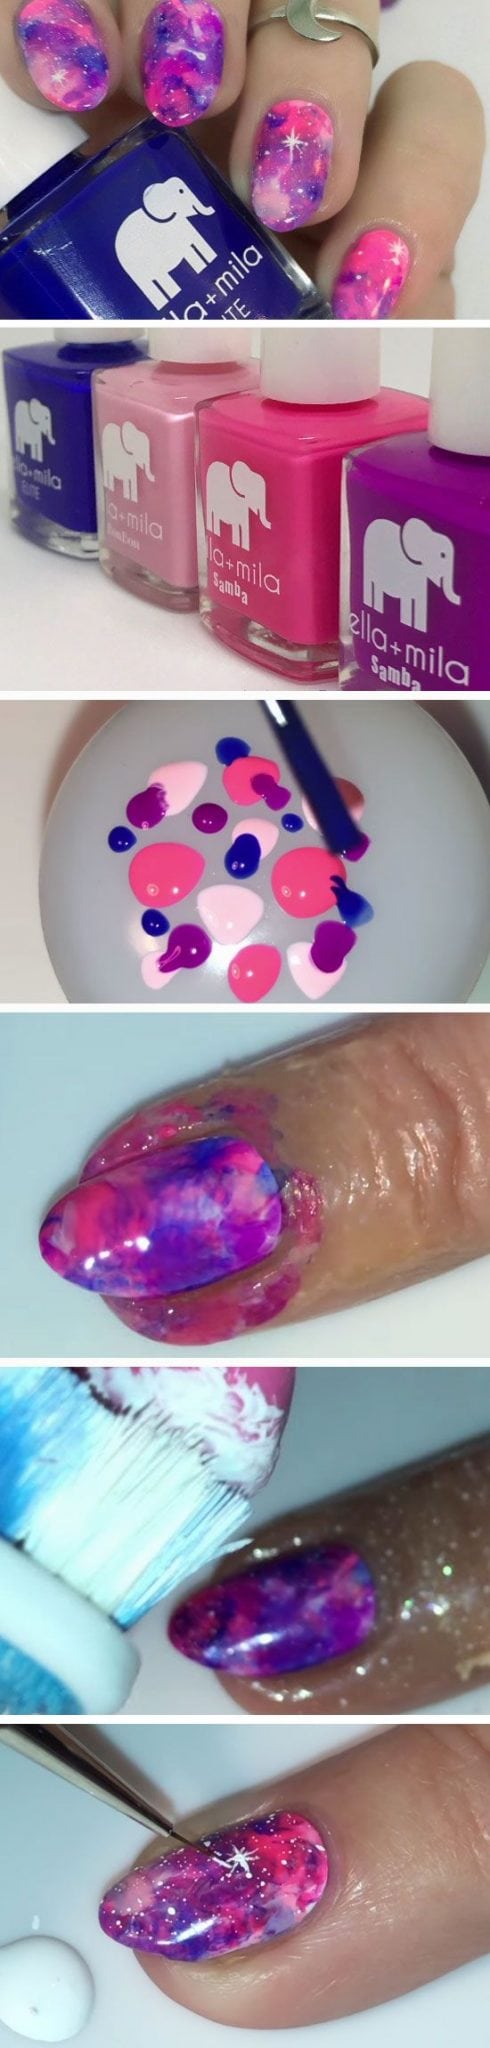 [ad_1]

Easiest Galaxy | Easy Spring Nail Designs for Short Nails | DIY Beach Nail Art Ideas for Teens
Source by lindamets1992
[ad_2]
			
			…